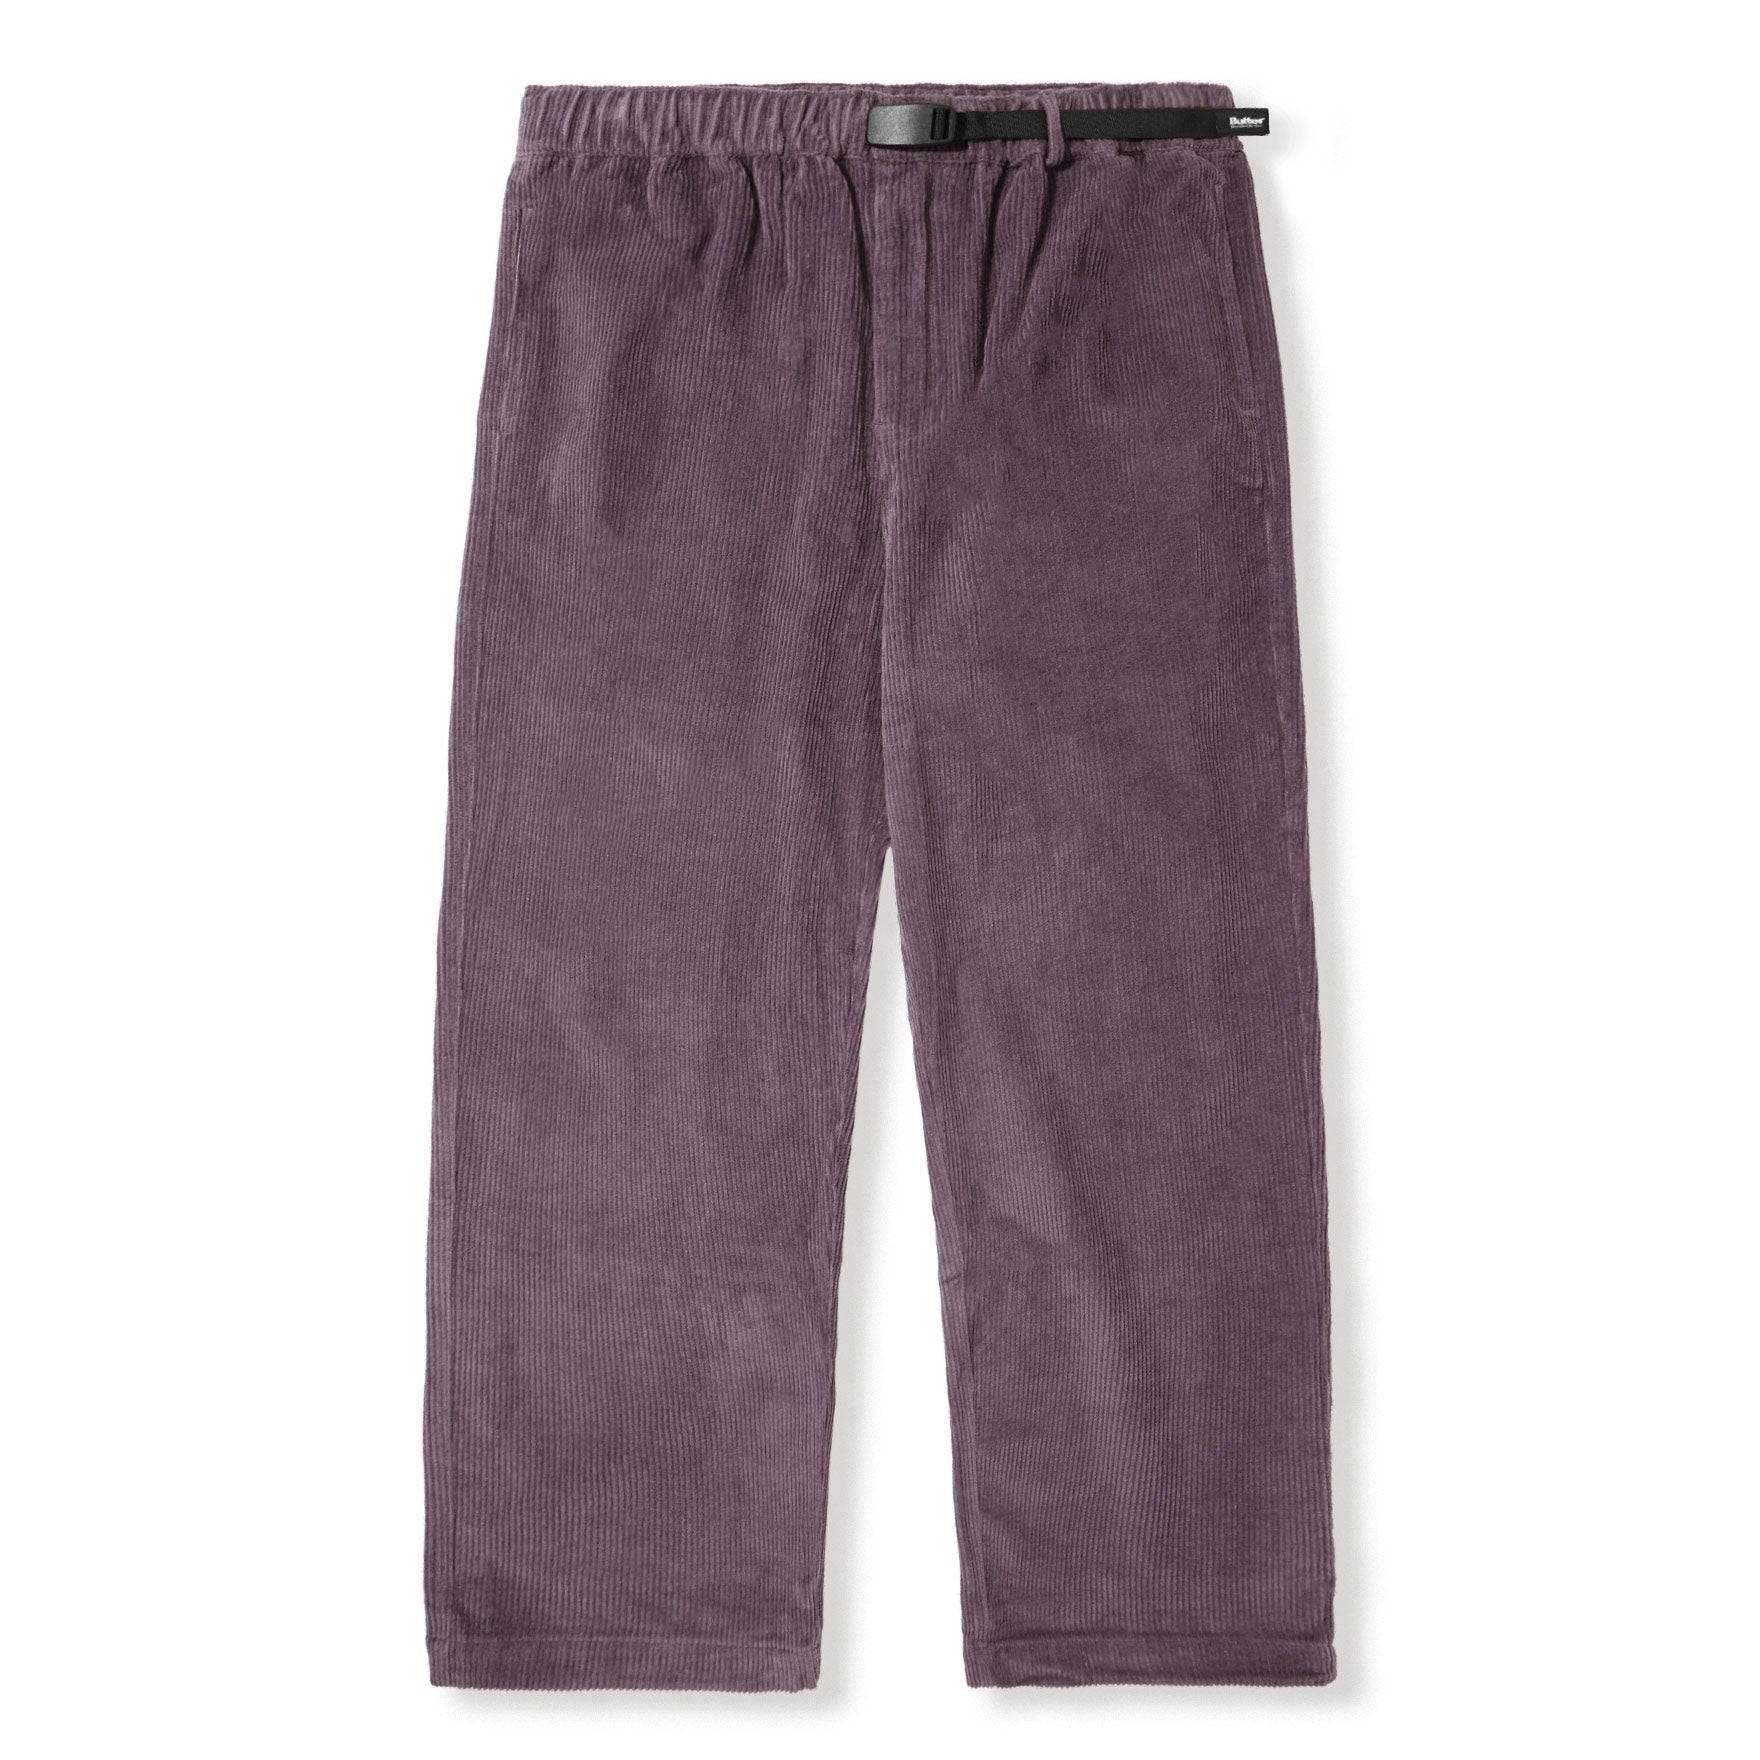 Butter Goods Chains Corduroy Pants Washed Grape